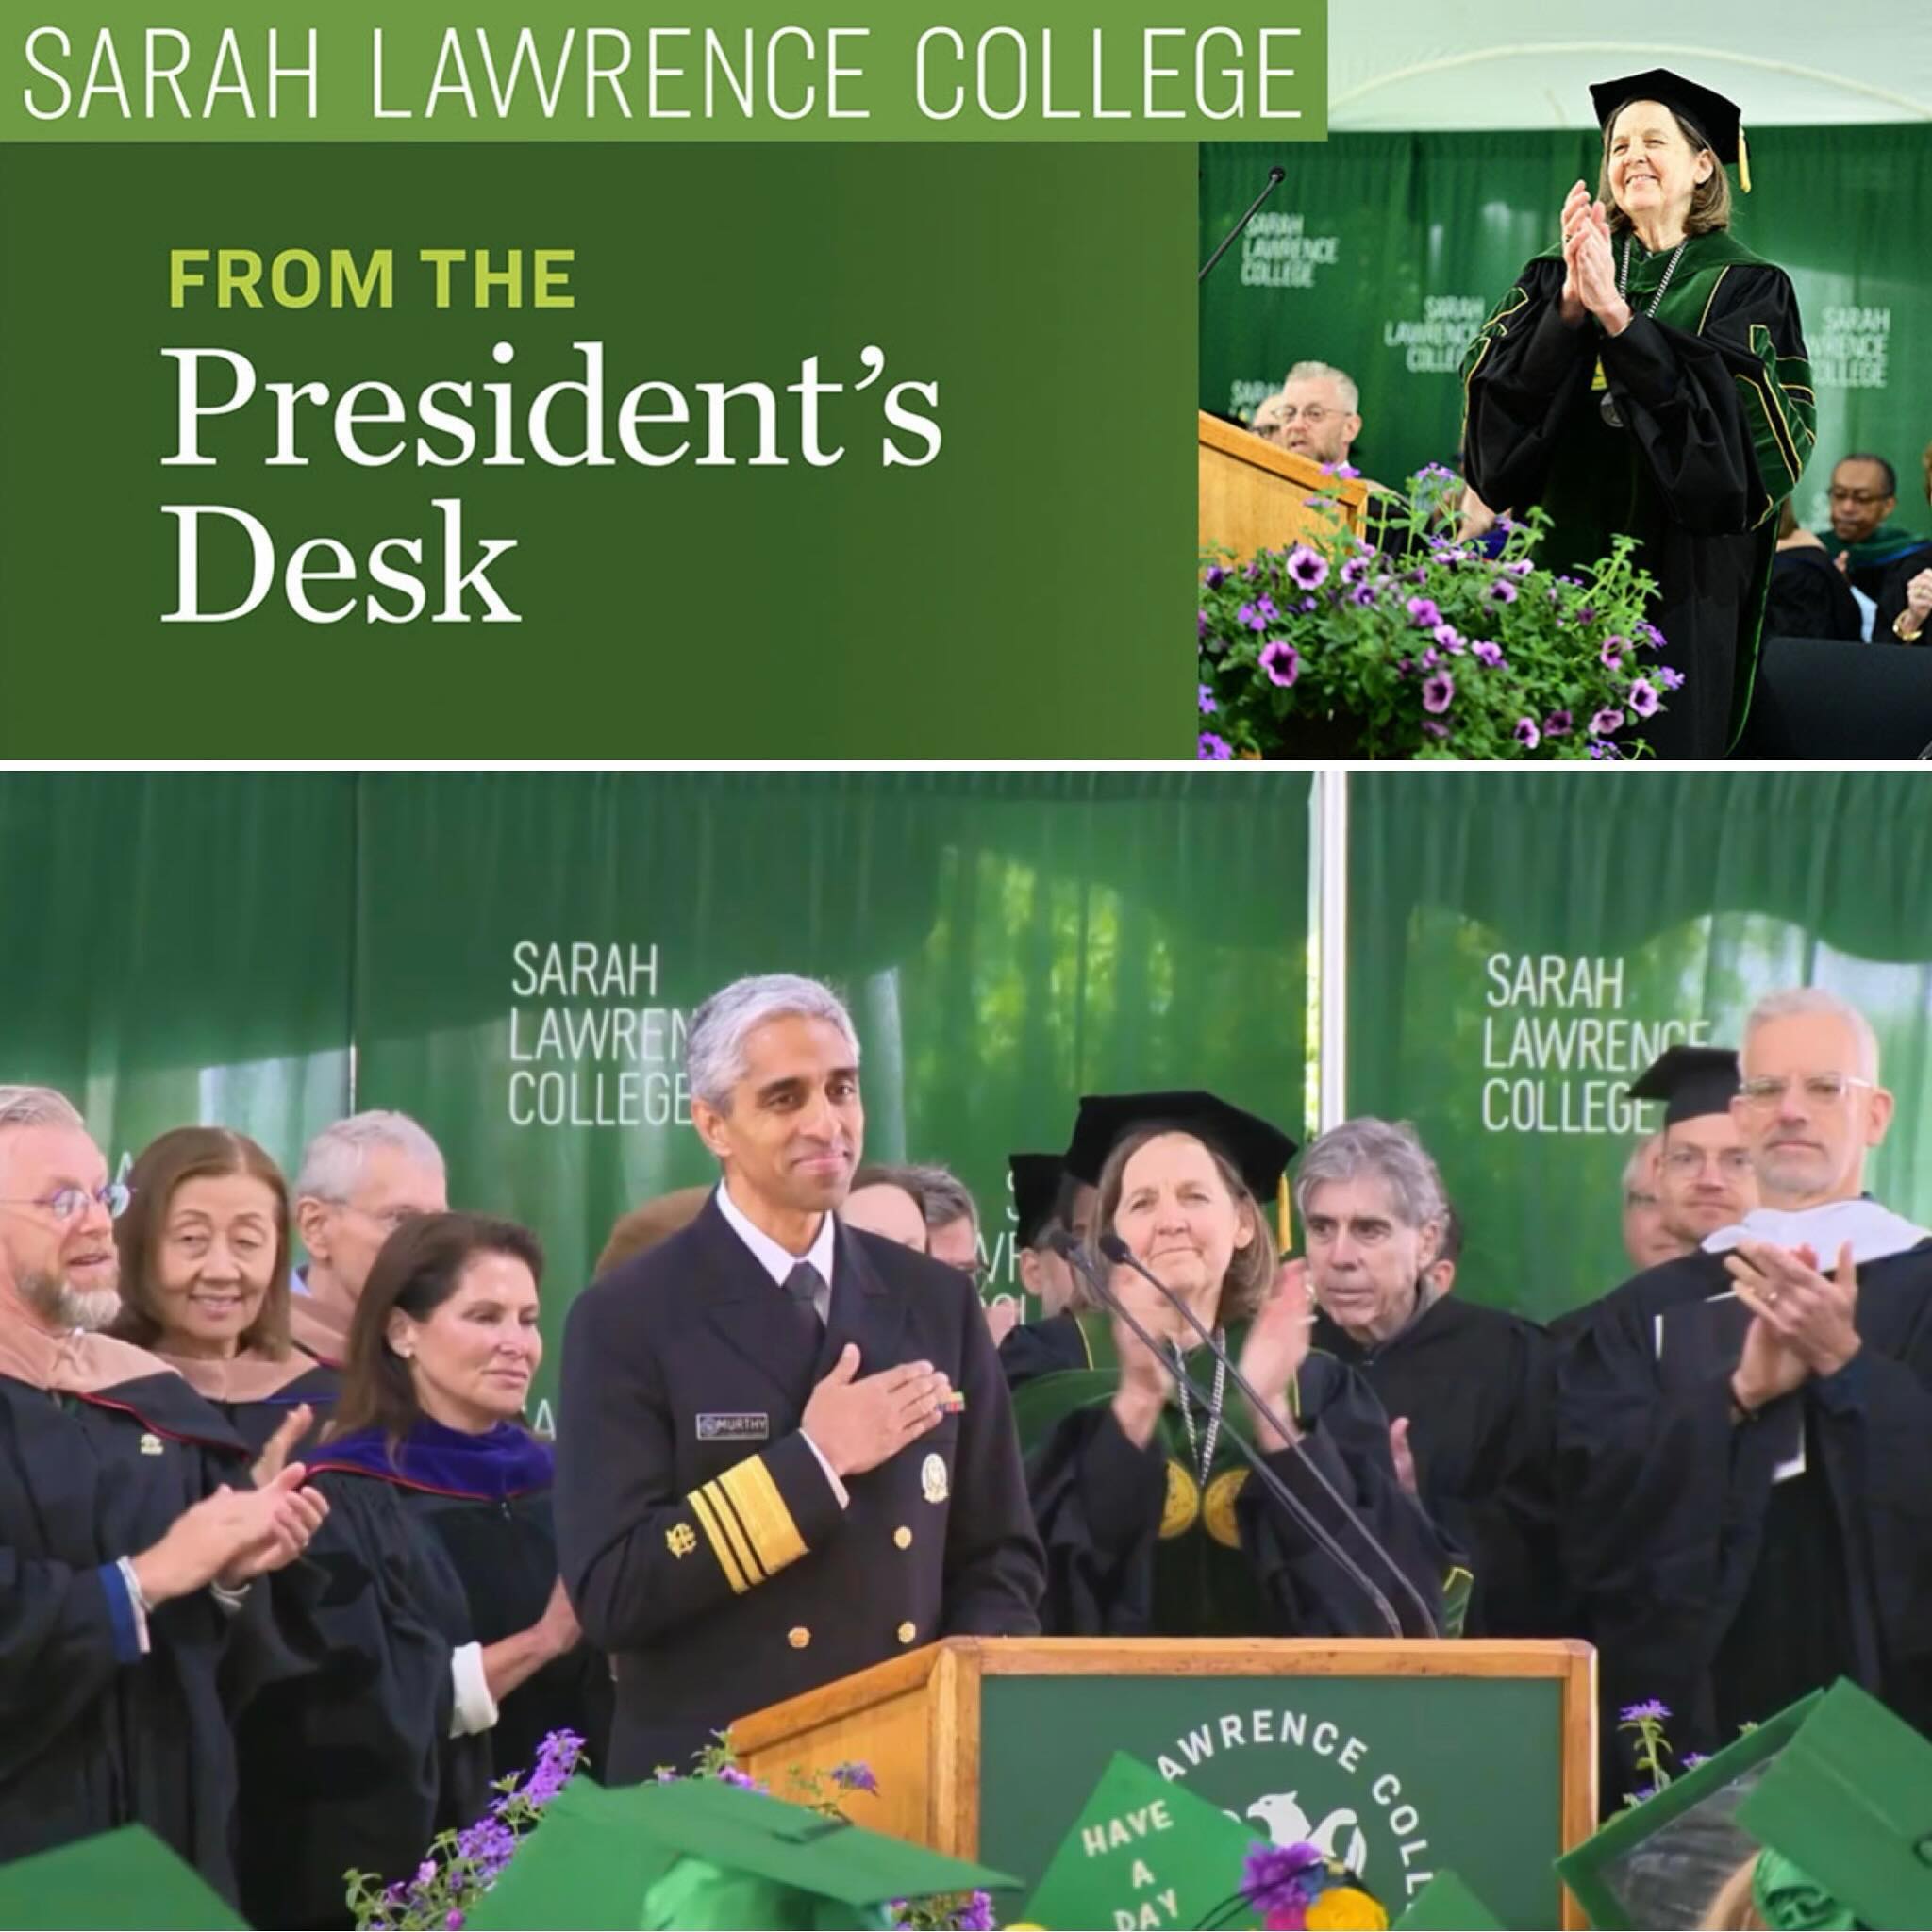 Collage with individuals in academic regalia at a college event.